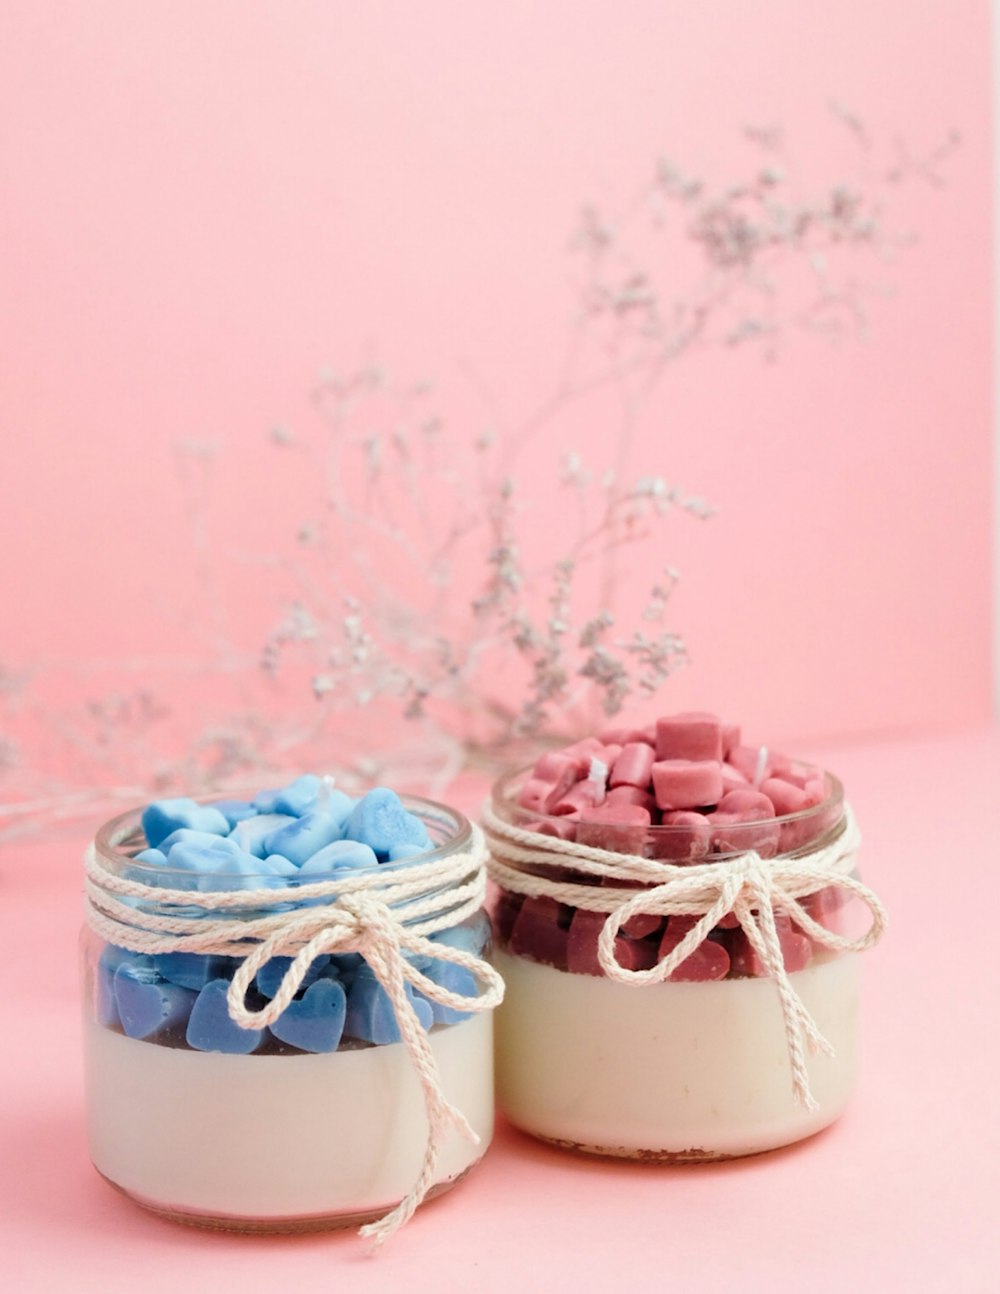 two small jars filled with marshmallows on a pink surface